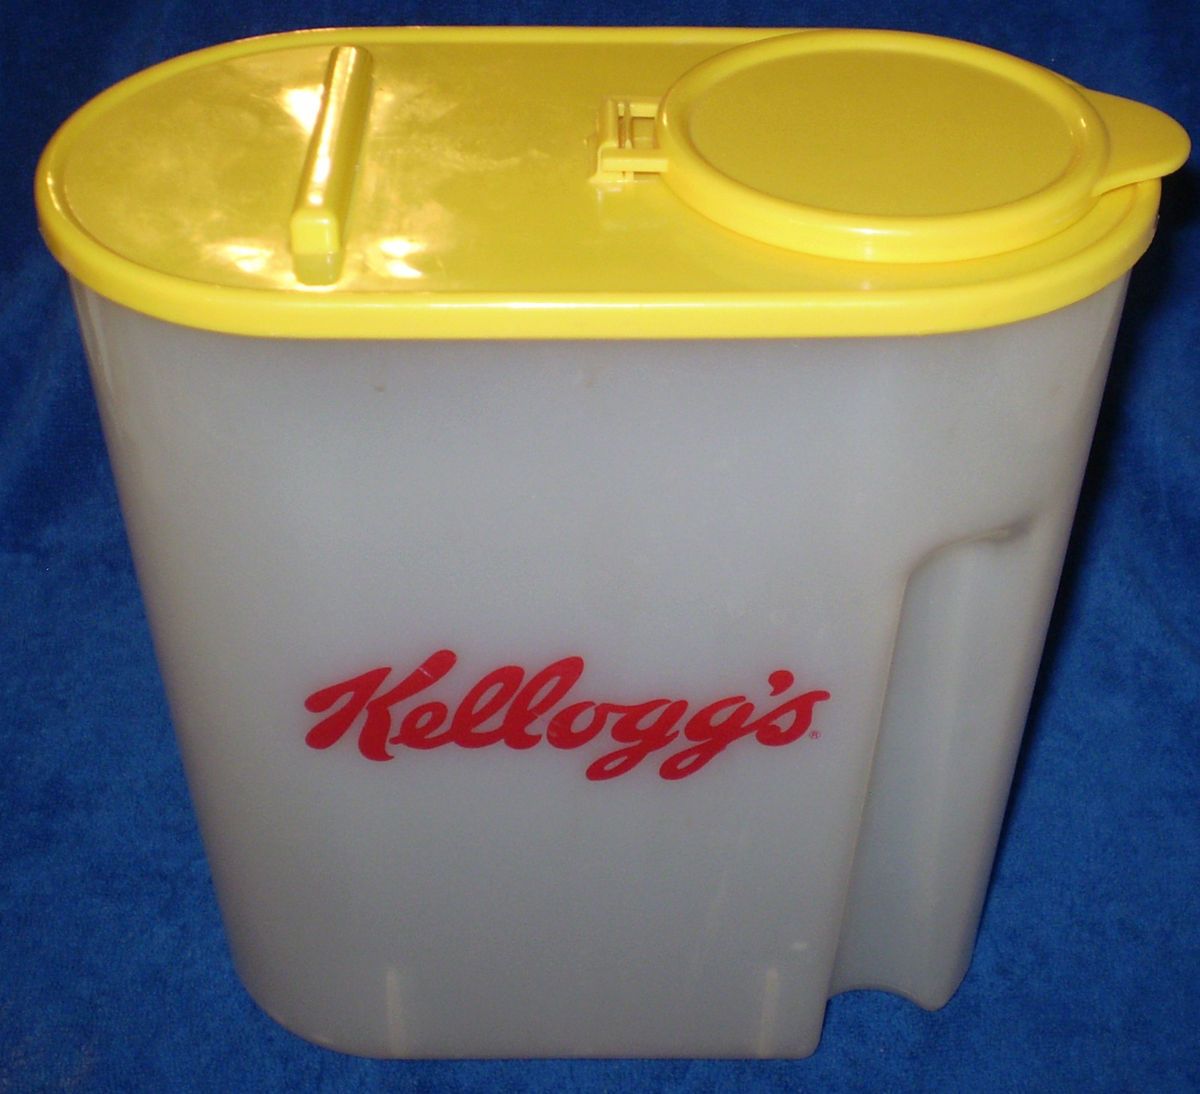 Kelloggs Plastic Cereal Container Large with Yellow Lid 1996